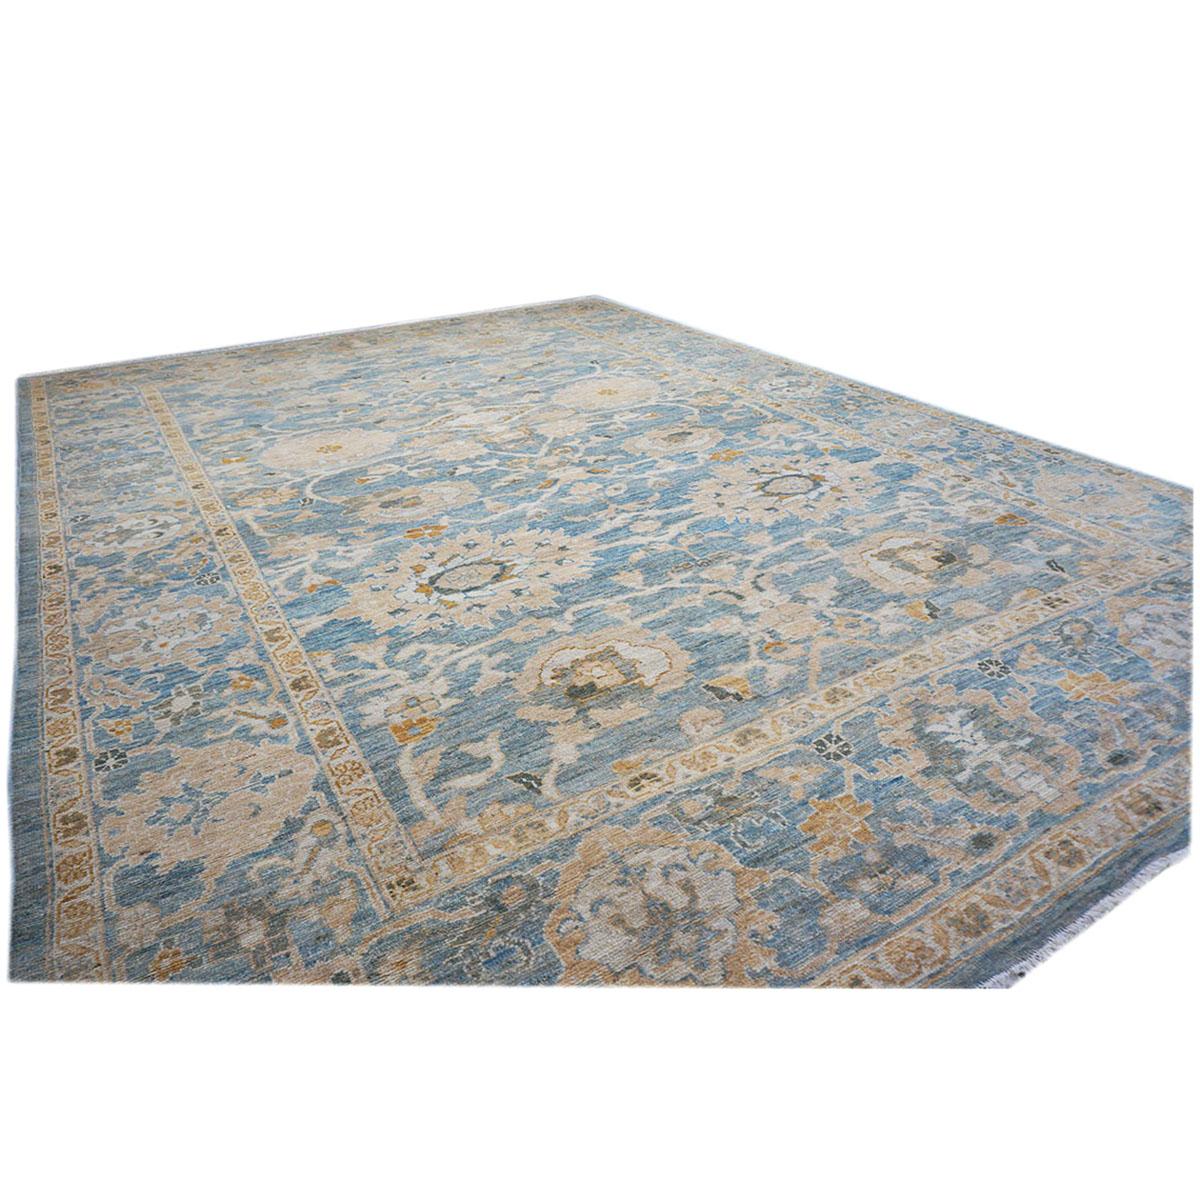 blue and beige area rug 9x12